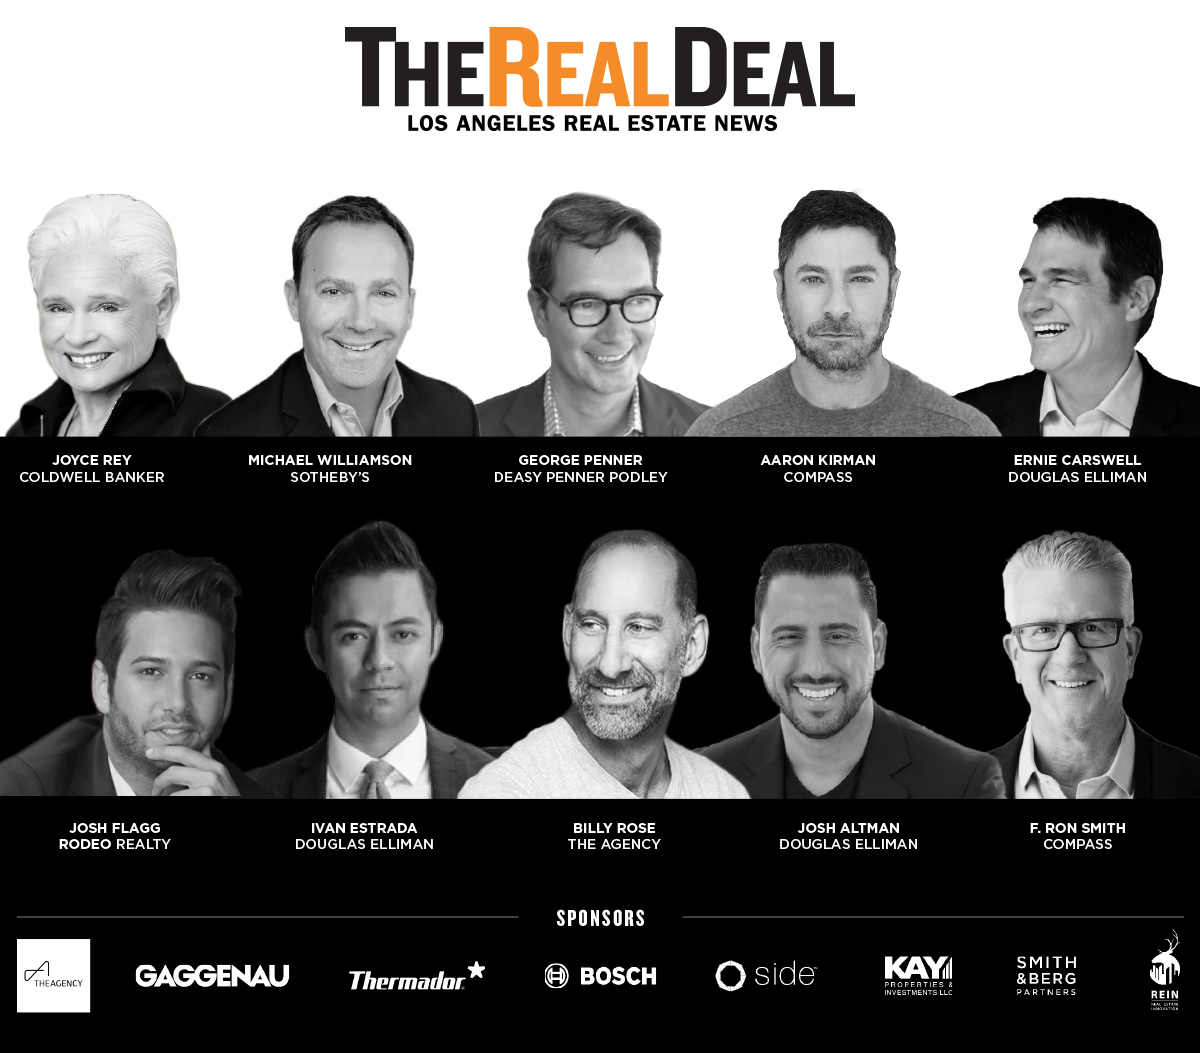 Click here to buy tickets to The Real Deal's L.A. Showcase and Forum